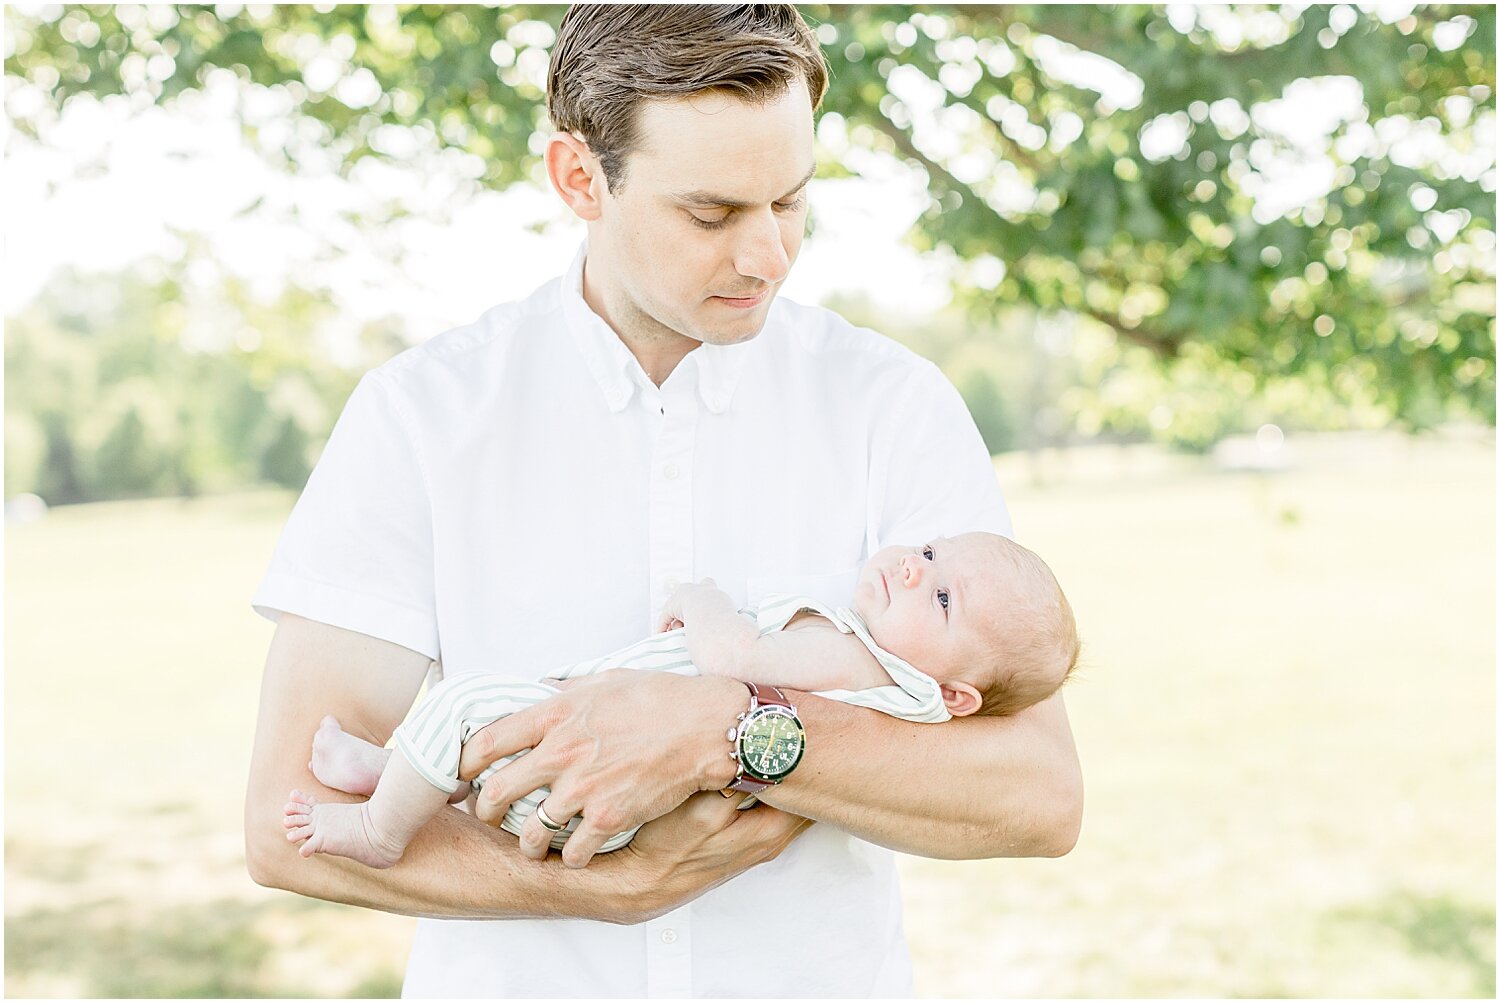 Dad and son at outdoor newborn session at Waveny Park with New Canaan Newborn Photographer, Kristin Wood Photography.